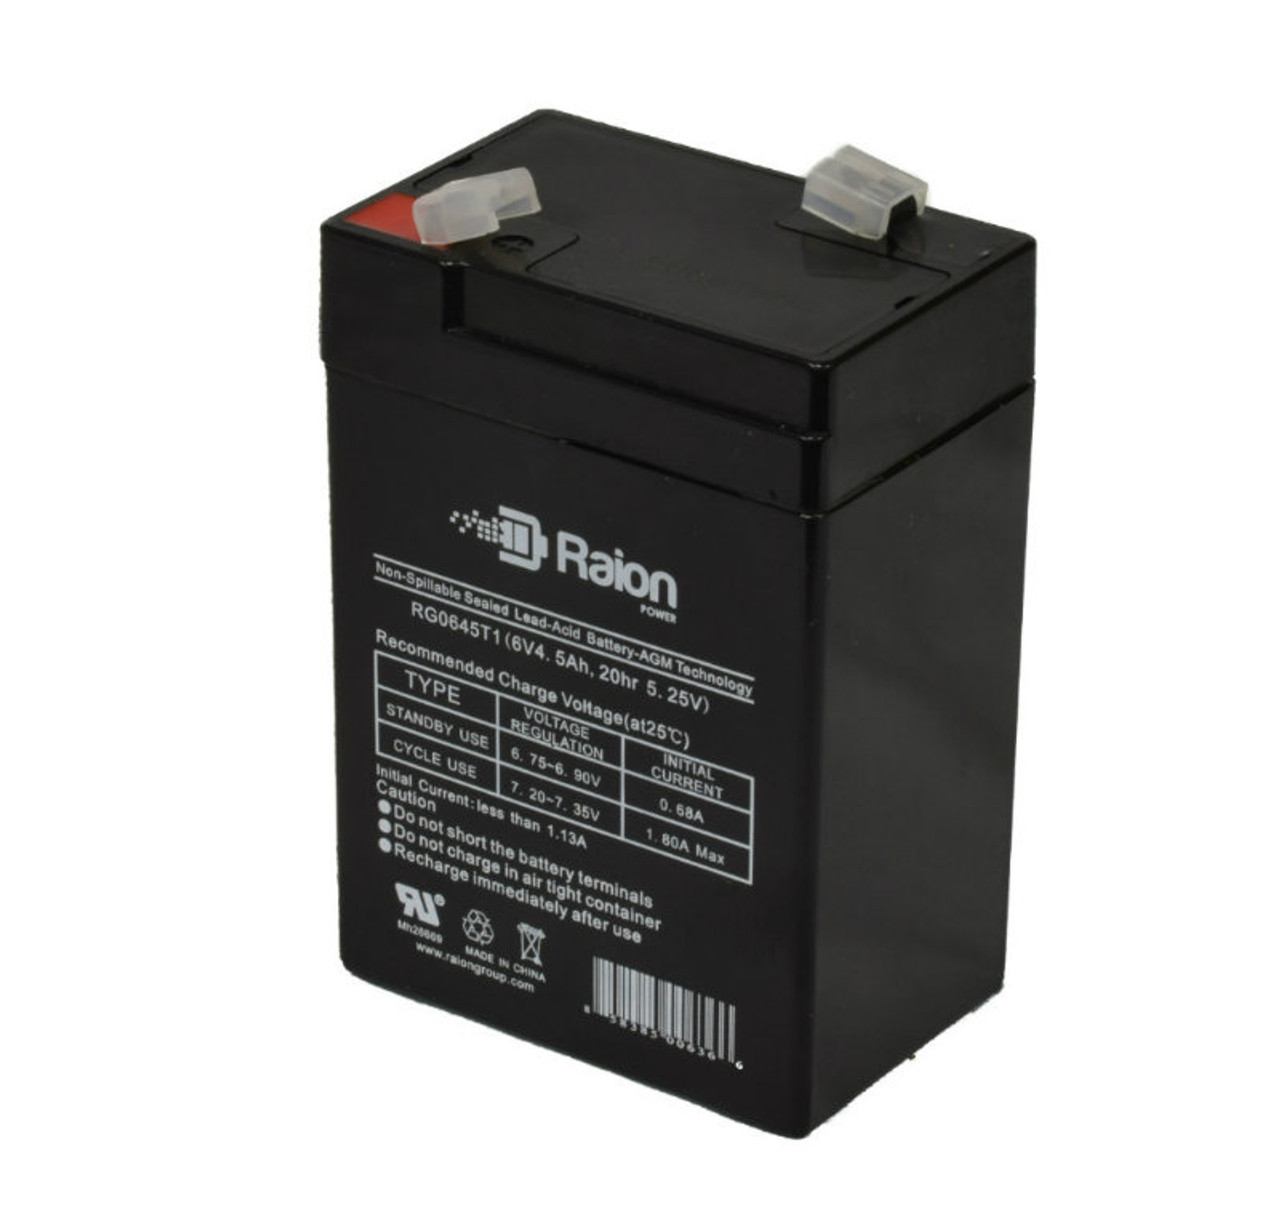 Raion Power RG0645T1 6V 4.5Ah Replacement Battery Cartridge for Unibo GB6-4.2